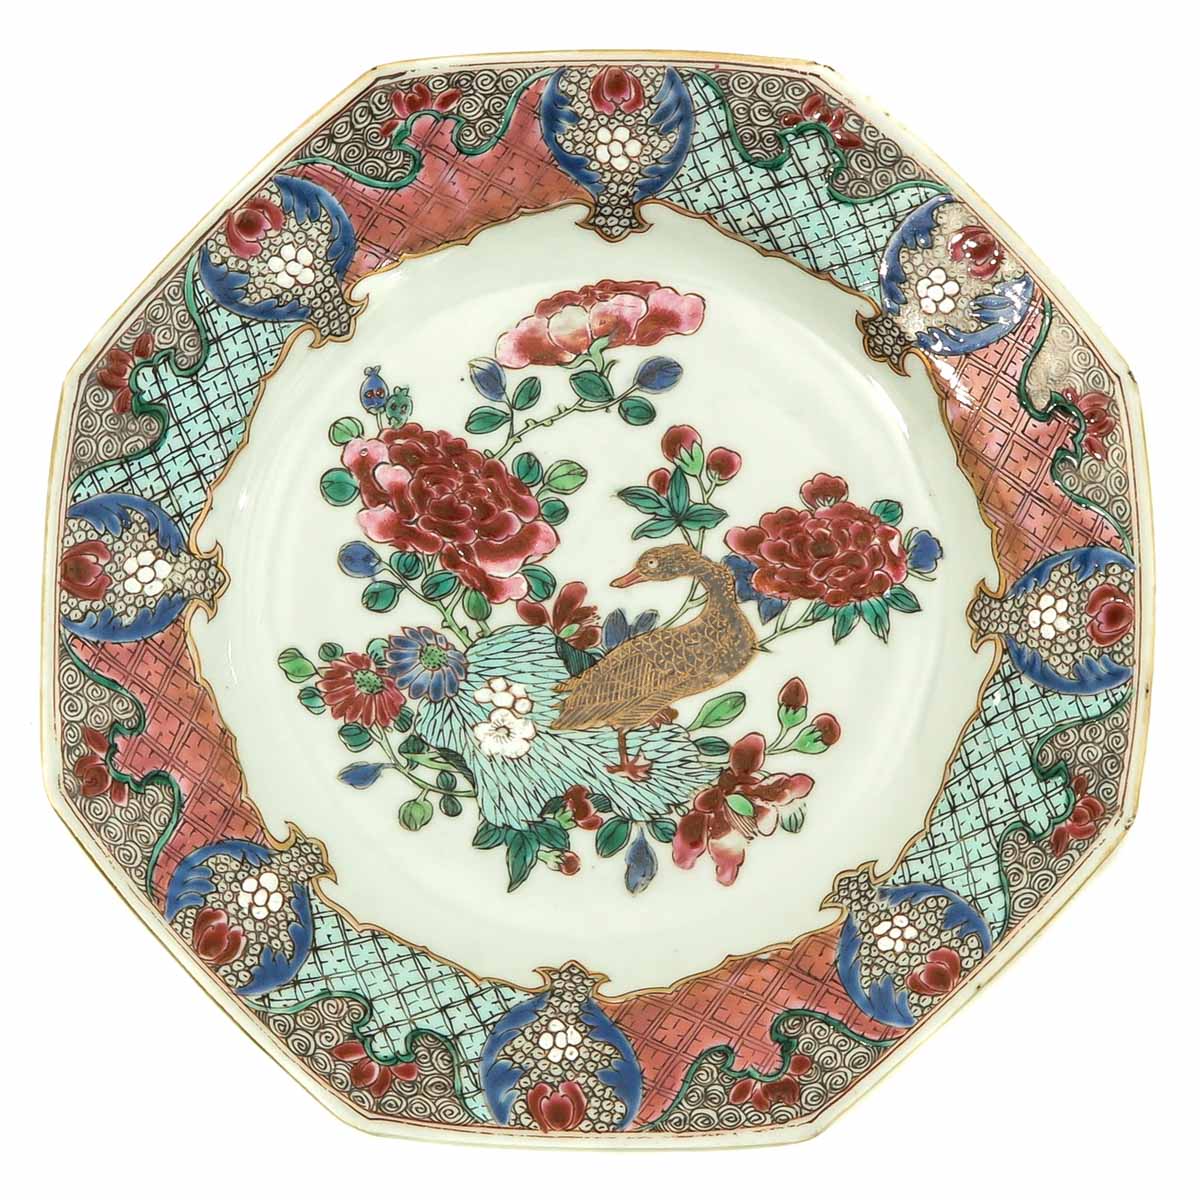 A Series of 3 Famille Rose Plates - Image 5 of 10